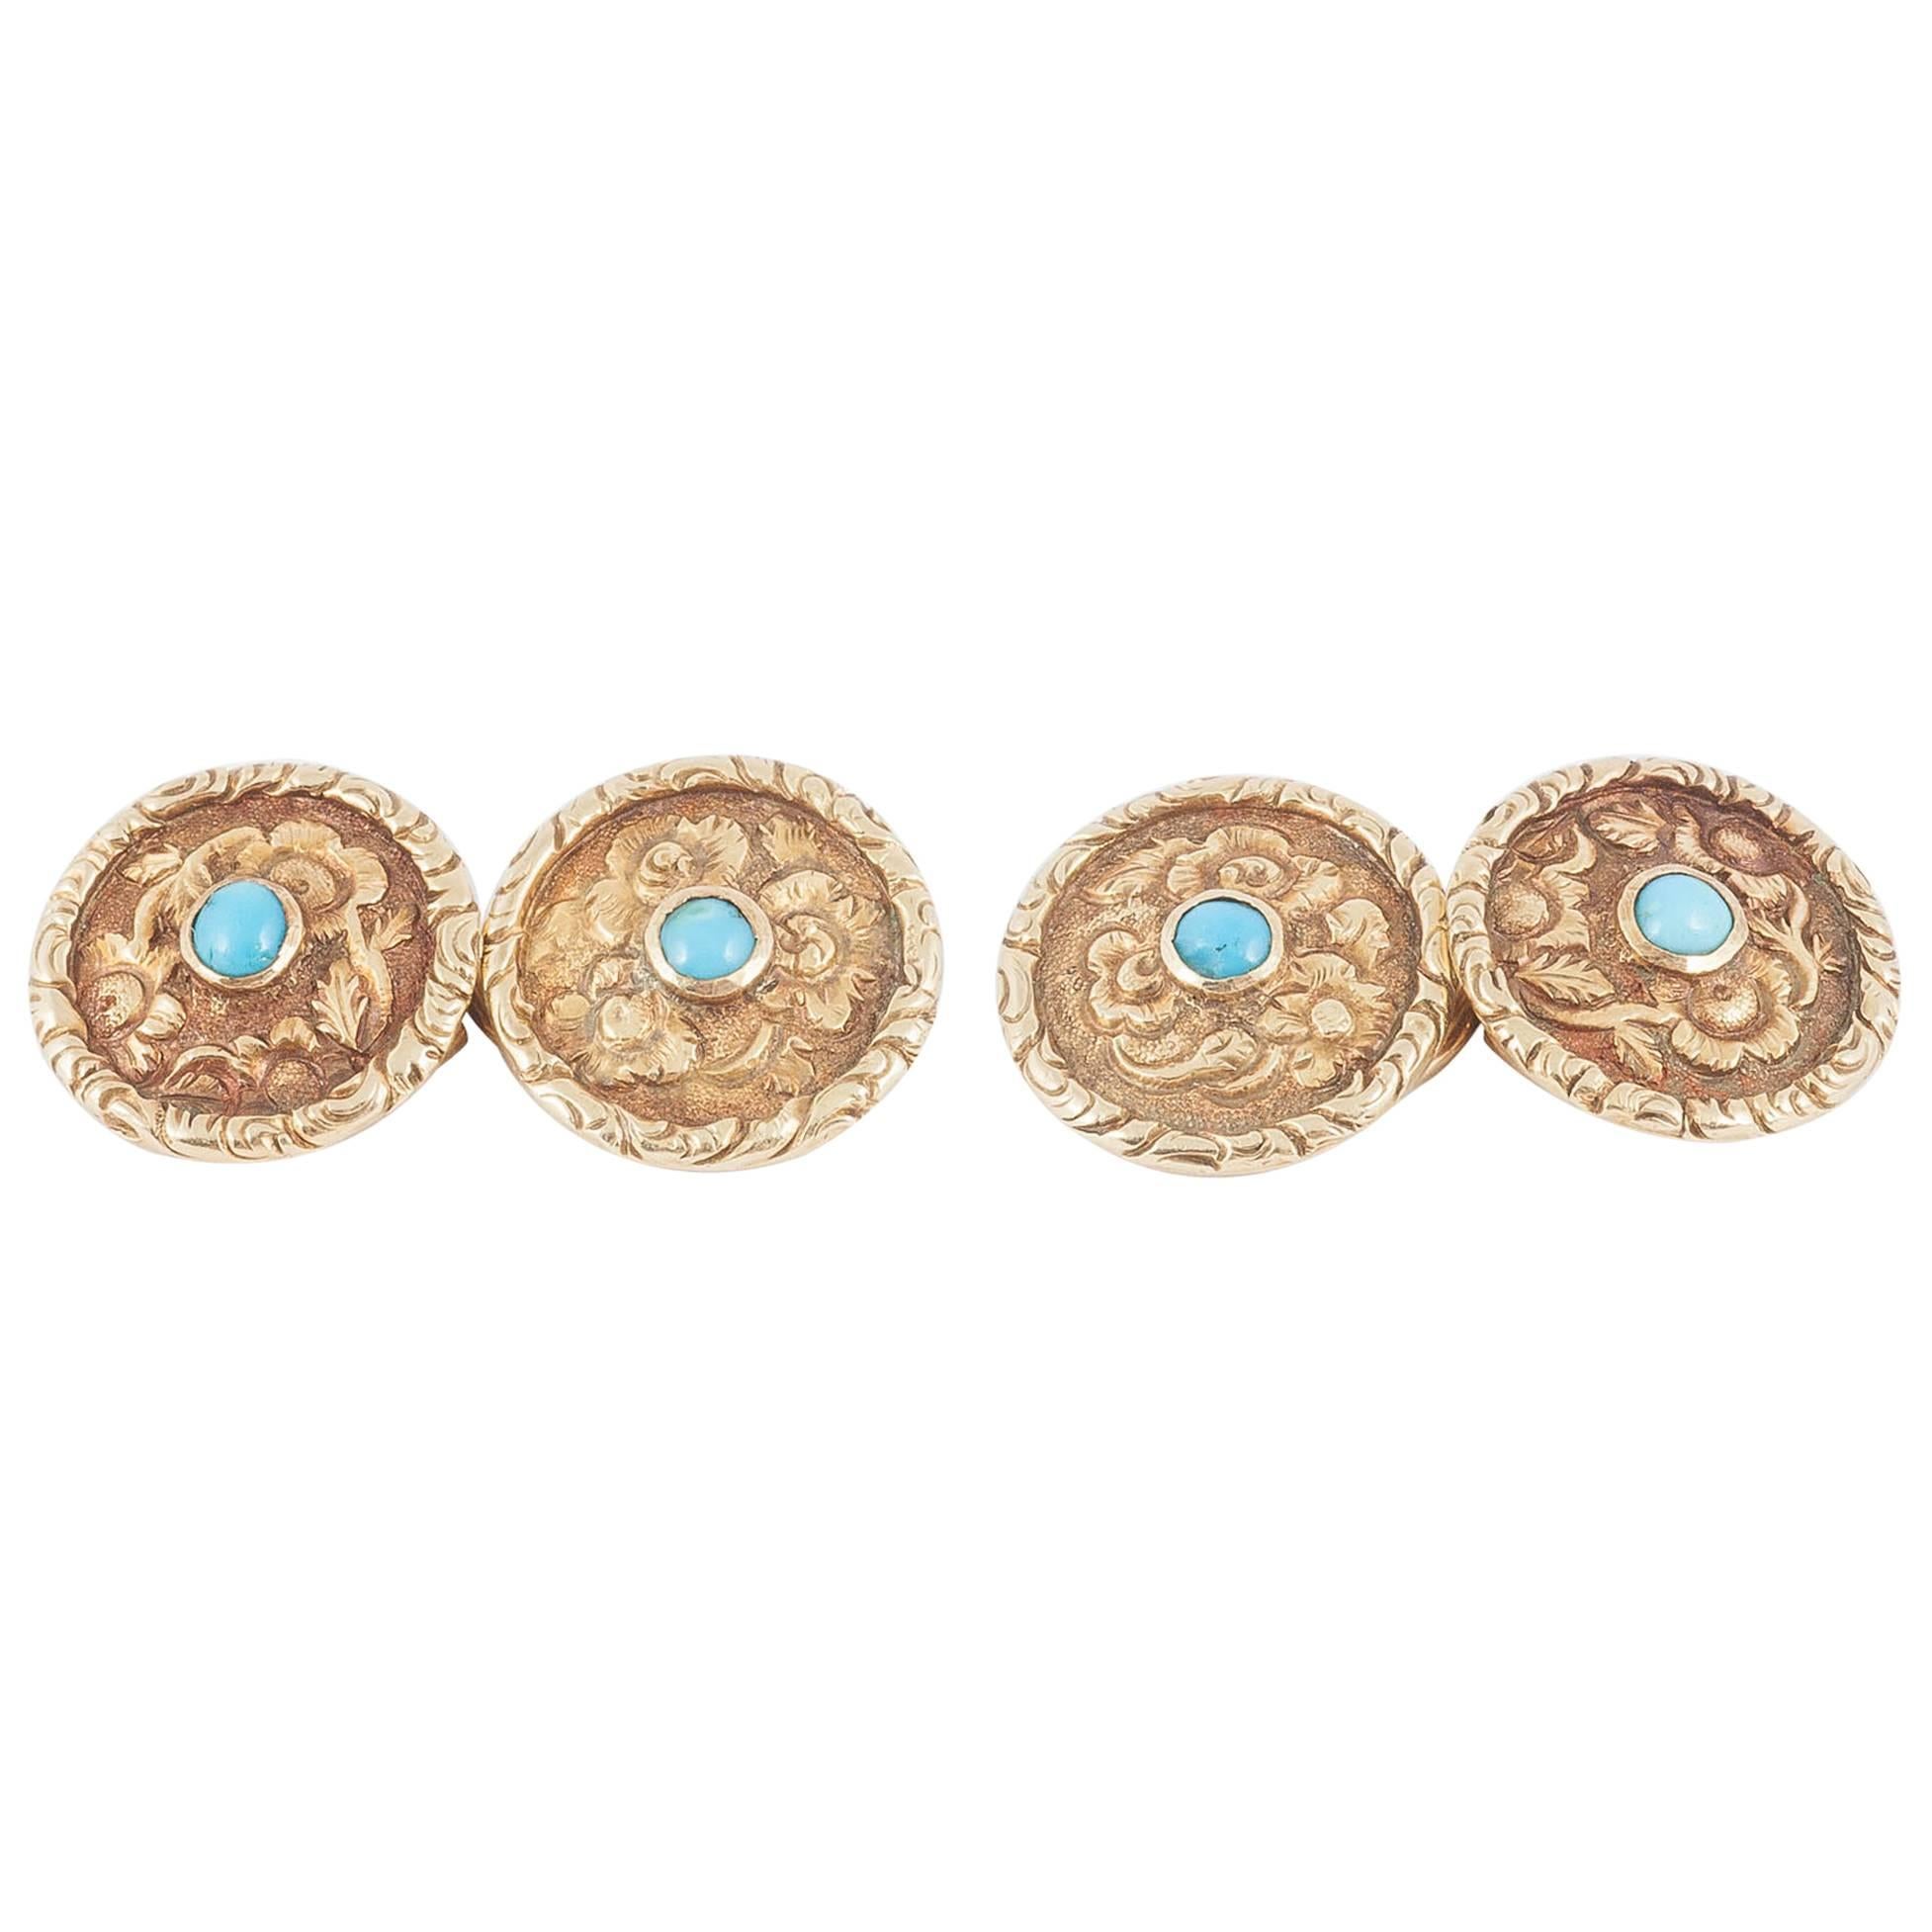 Carved Gold Floral Design Cufflinks with Turquoise Centre, English circa 1840 For Sale